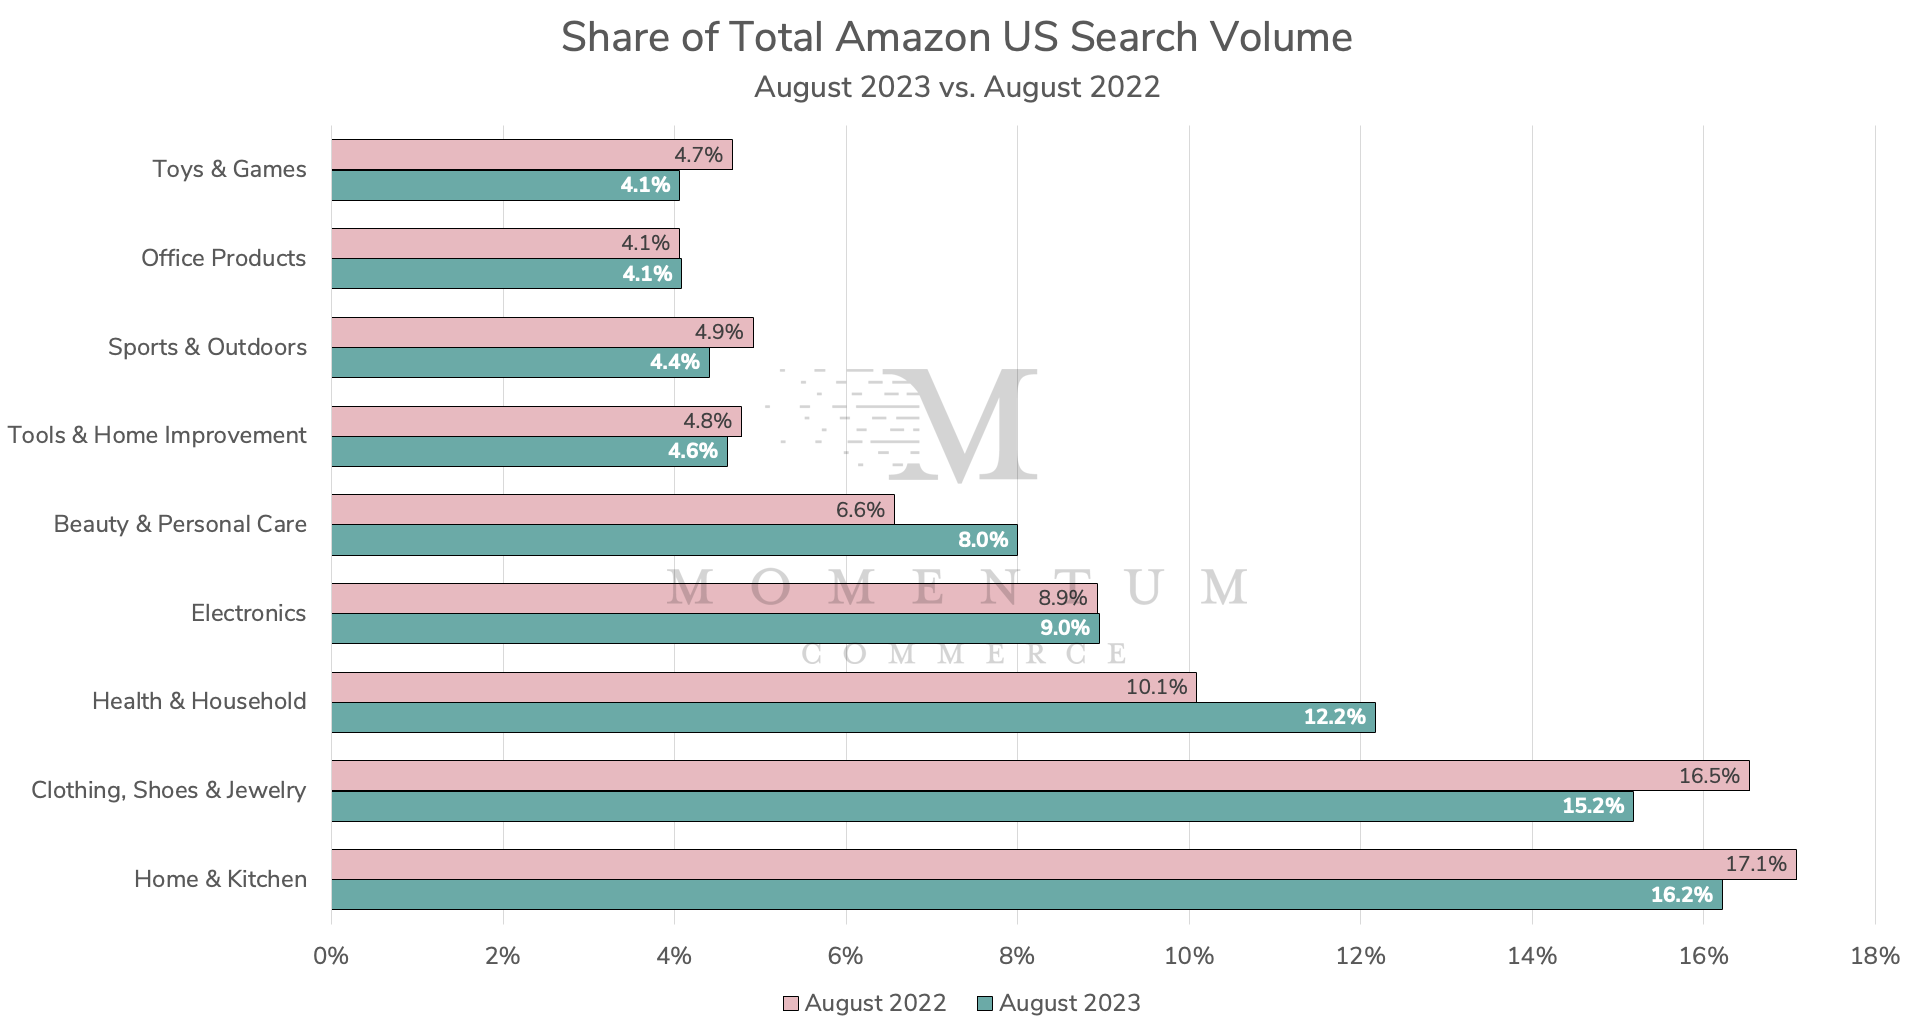 2023 amazon us search volume share by category